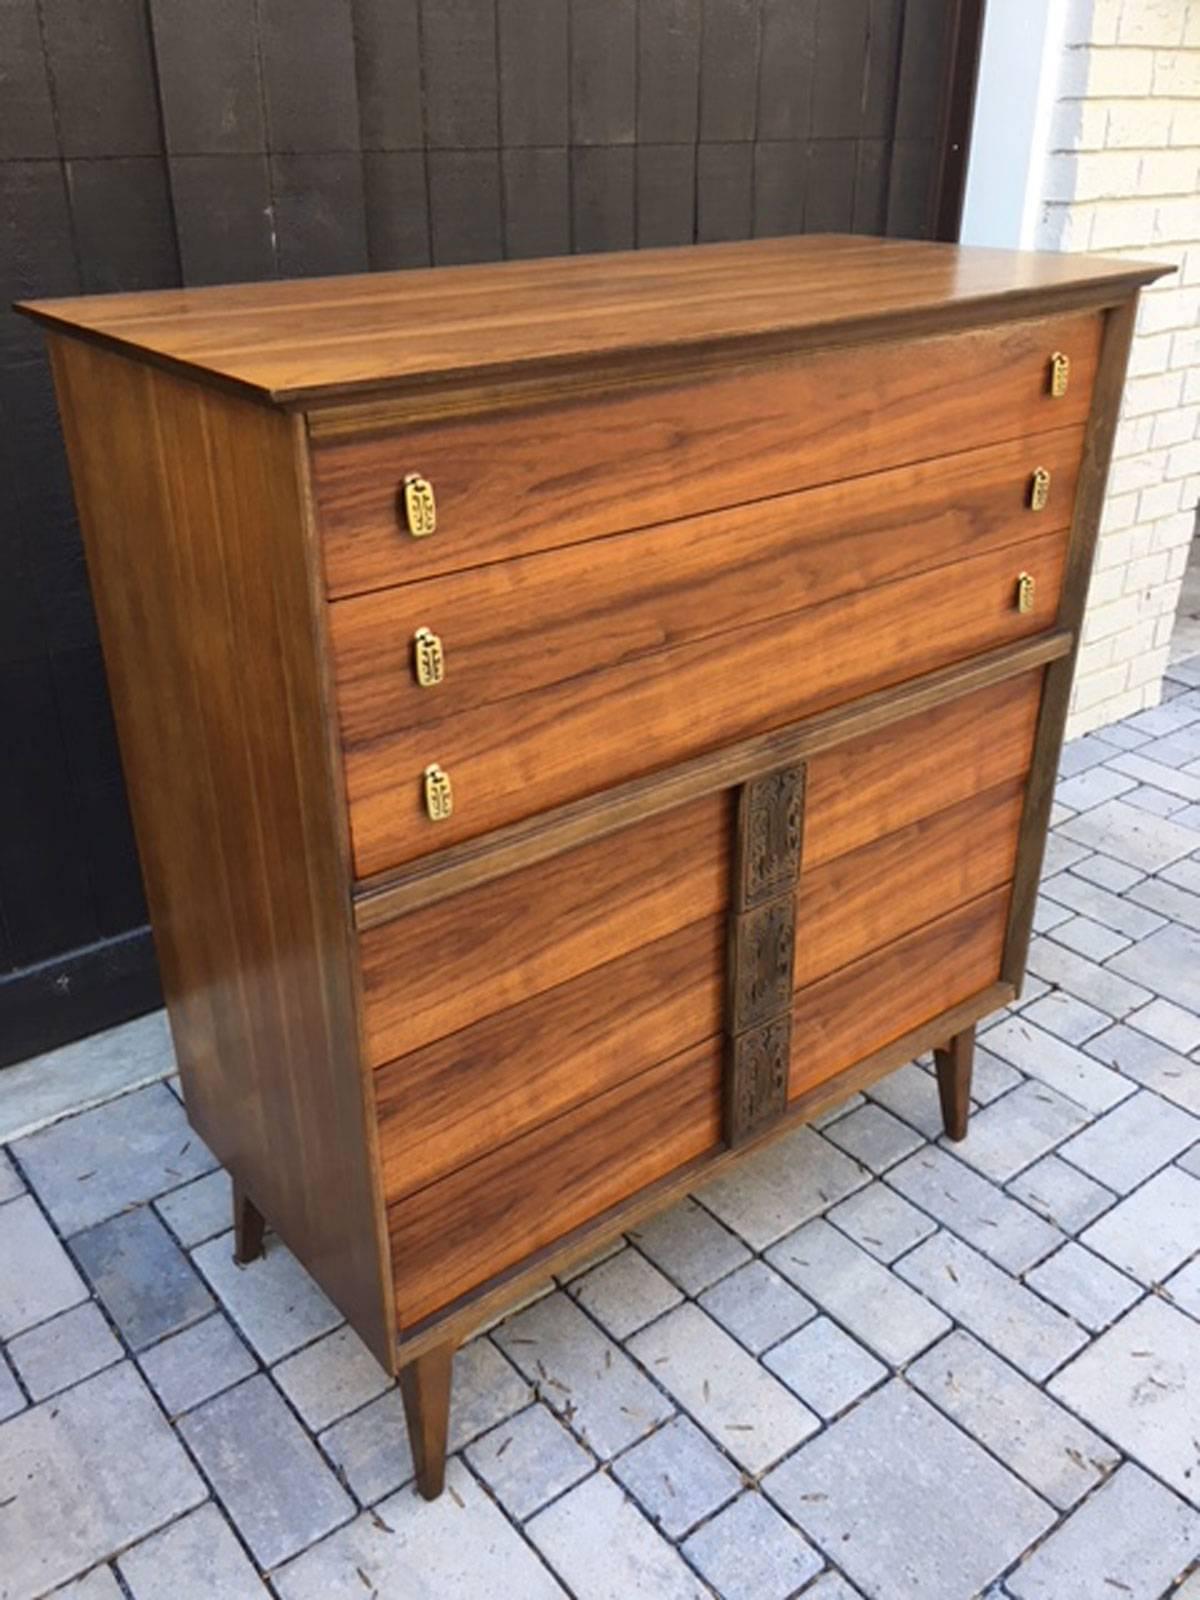 Unique Mid-Century Modern highboy dresser from the Mayan collection by Bassett. Refinished and very nice, circa 1960s. Walnut.